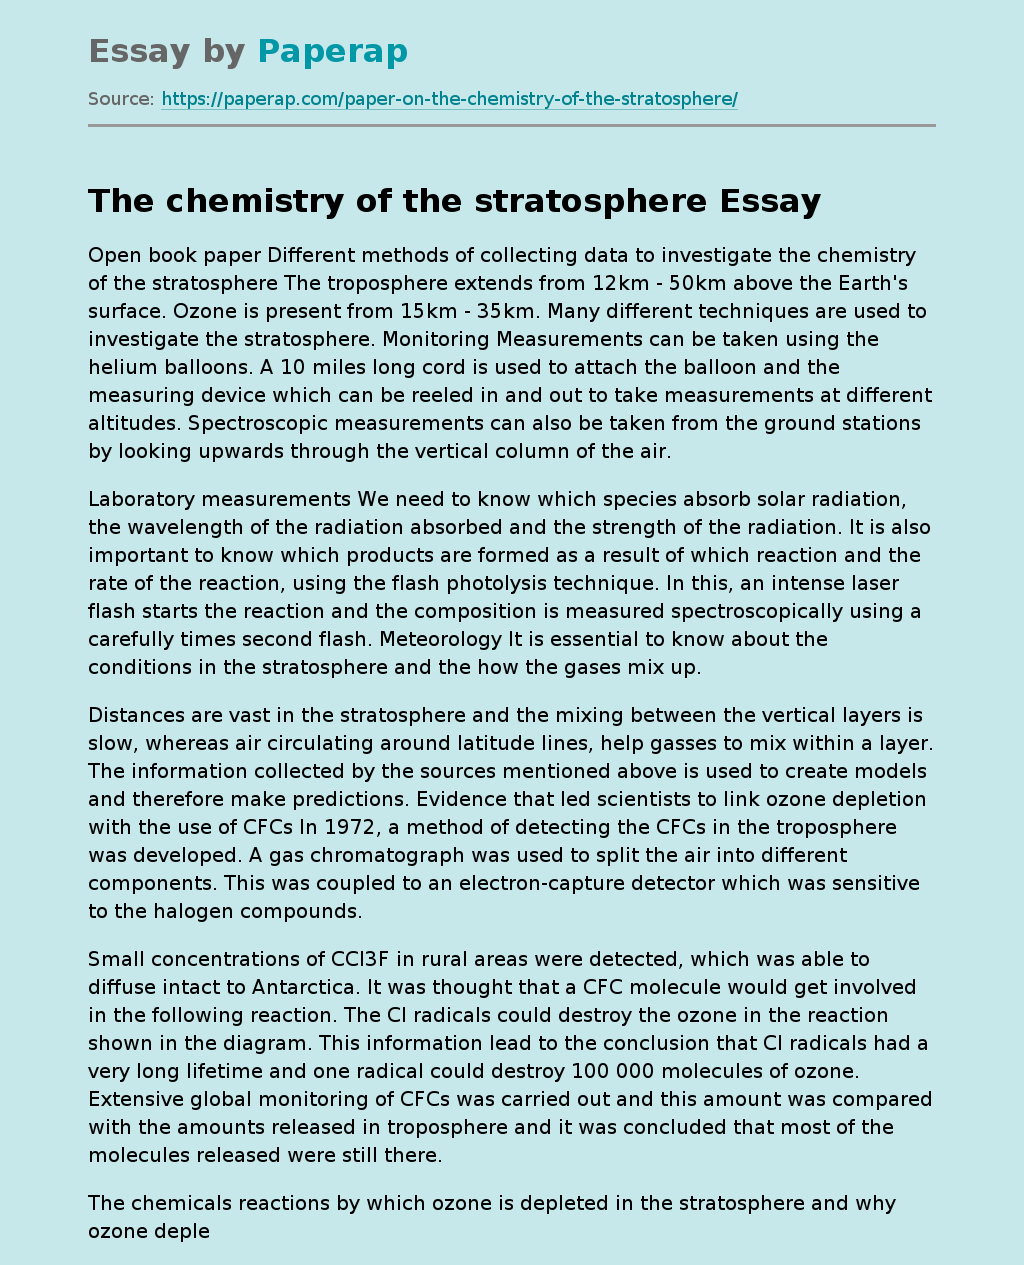 Different Methods Of Collecting Data To Investigate The Chemistry Of The Stratosphere